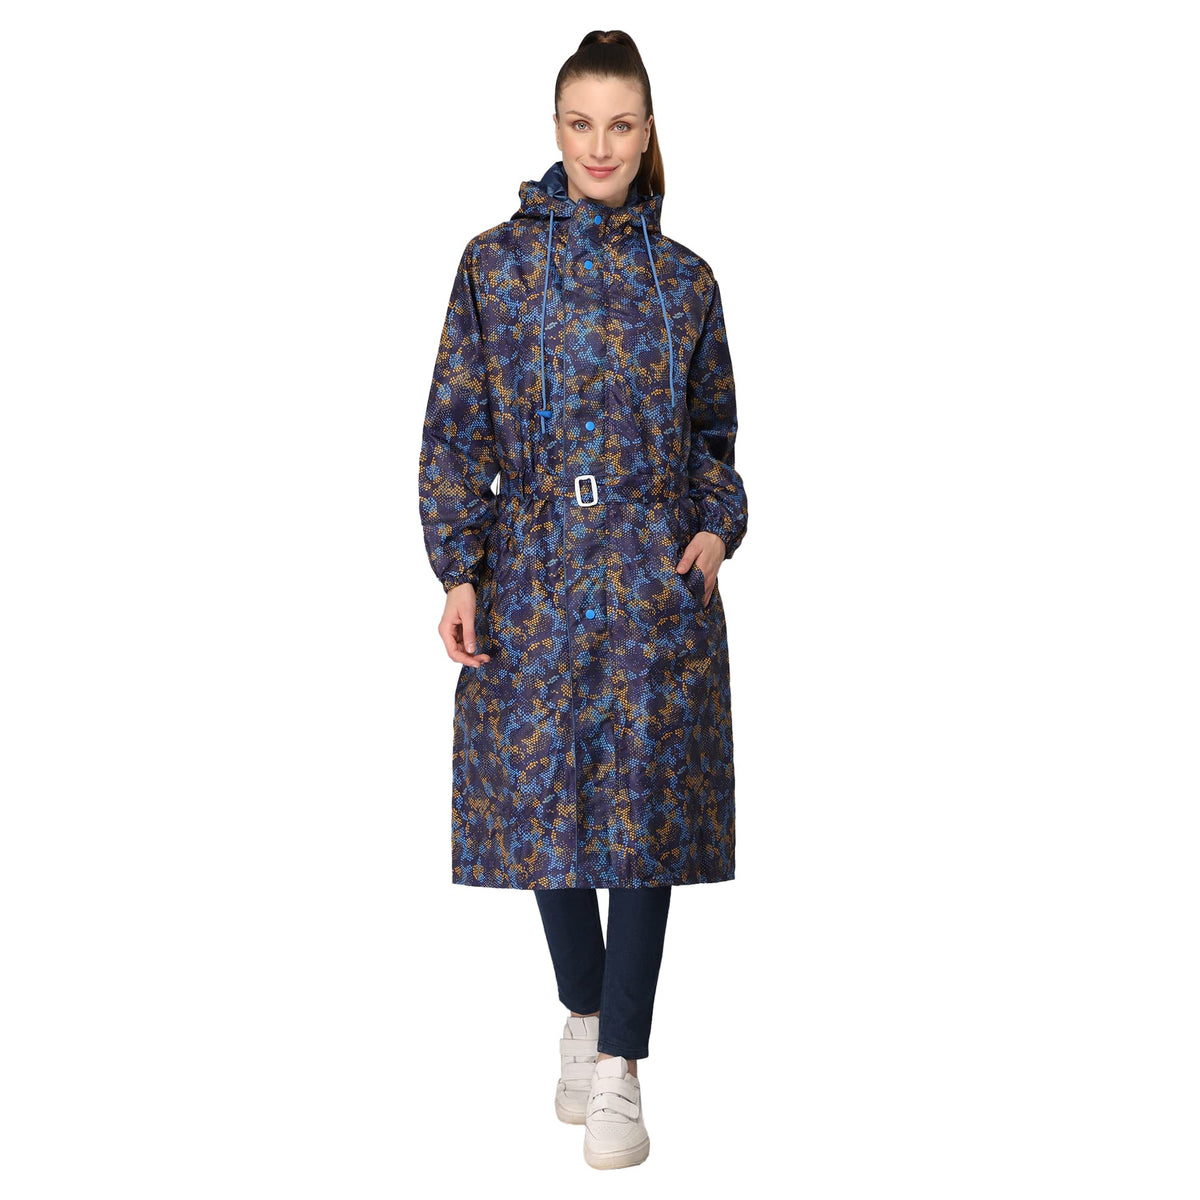 THE CLOWNFISH Juliet Series Raincoats for Women Rain Coat for Women Raincoat for Ladies Waterproof Reversible Double Layer Longcoat with Printed Plastic Pouch (Blue, XXL)